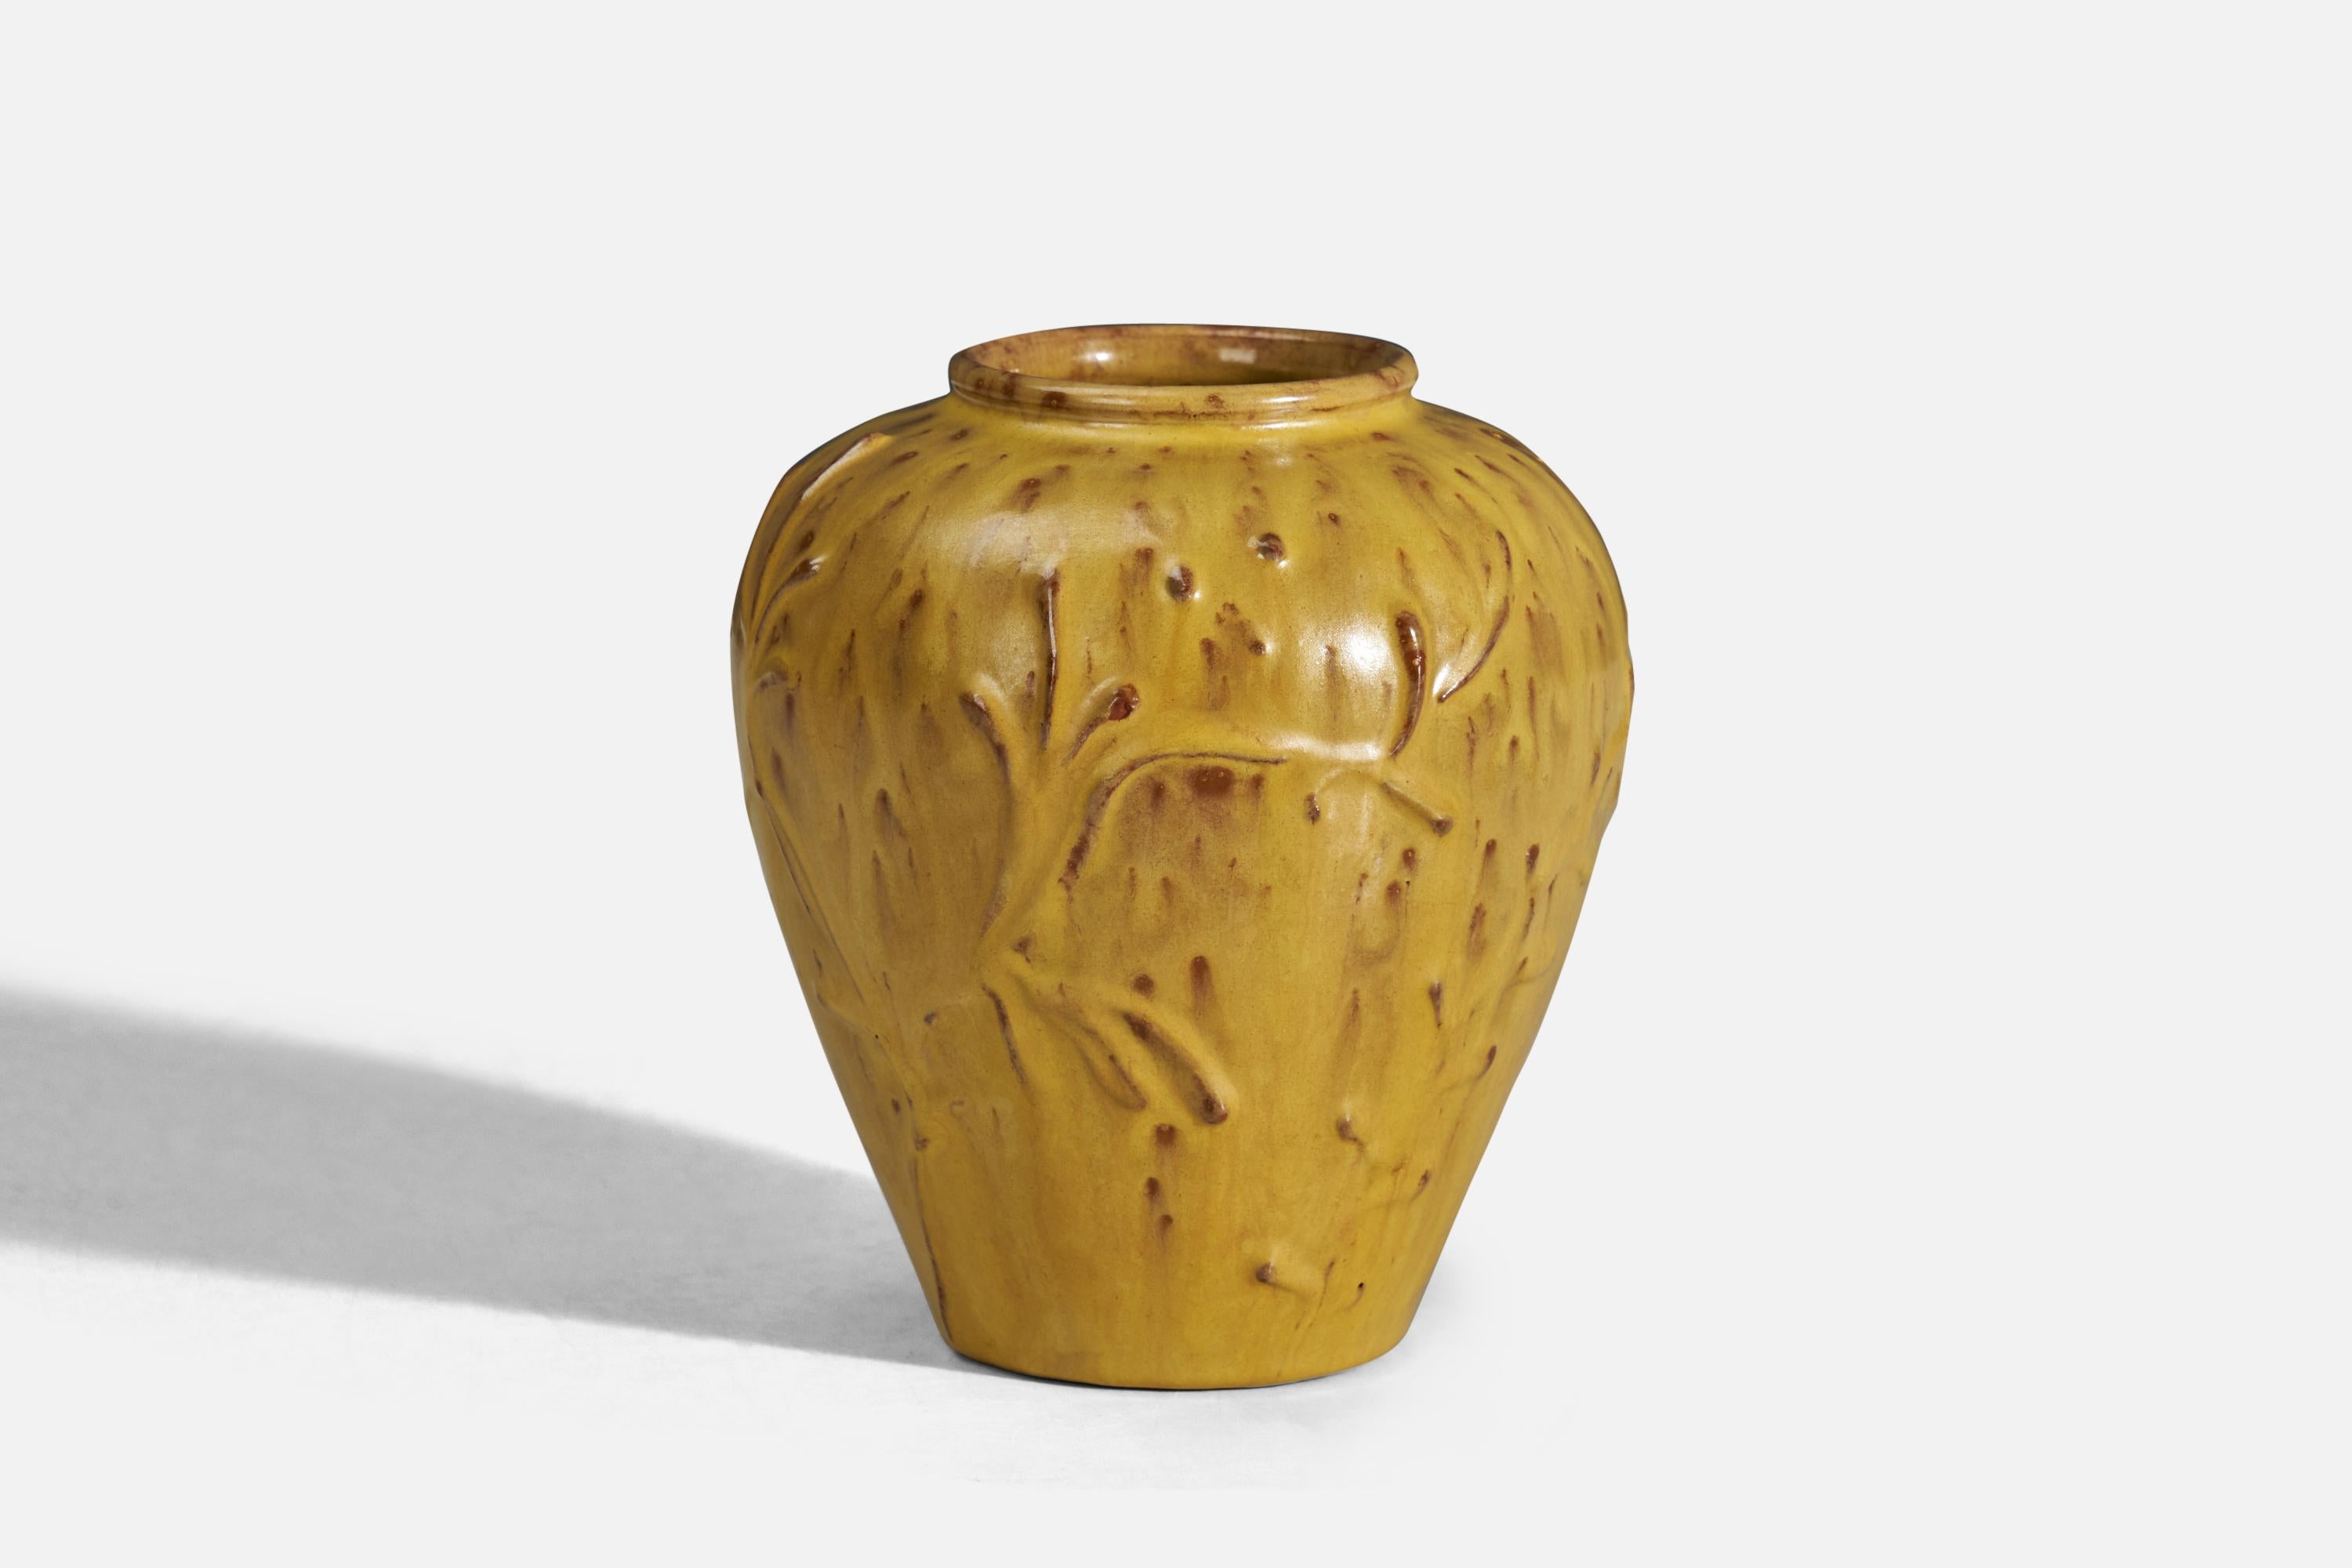 A yellow glazed earthenware vase designed and produced by Nittsjö, Sweden, 1940s.